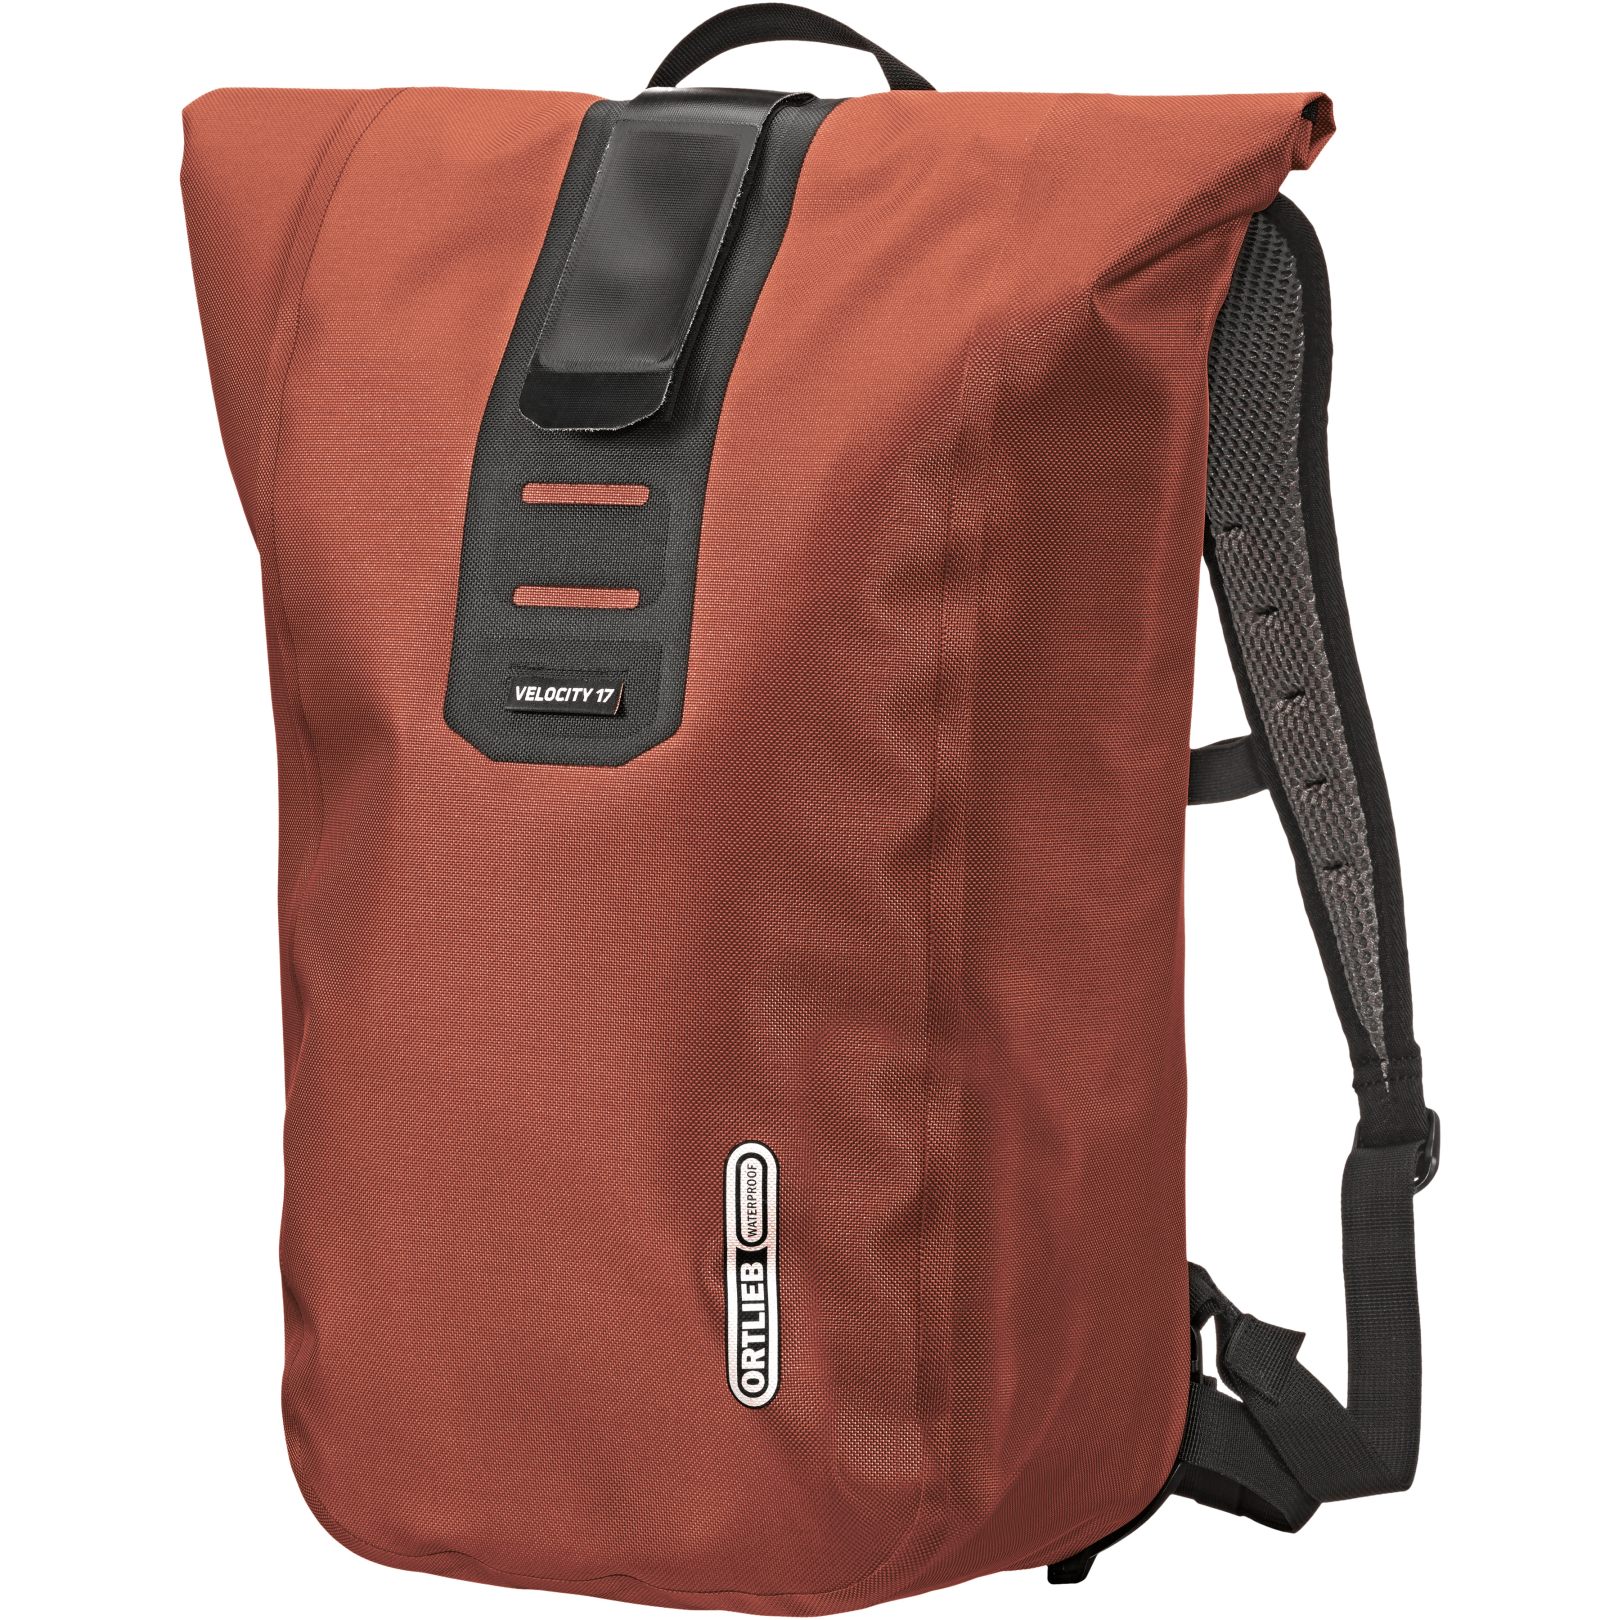 Picture of ORTLIEB Velocity PS - 17L Backpack - rooibos